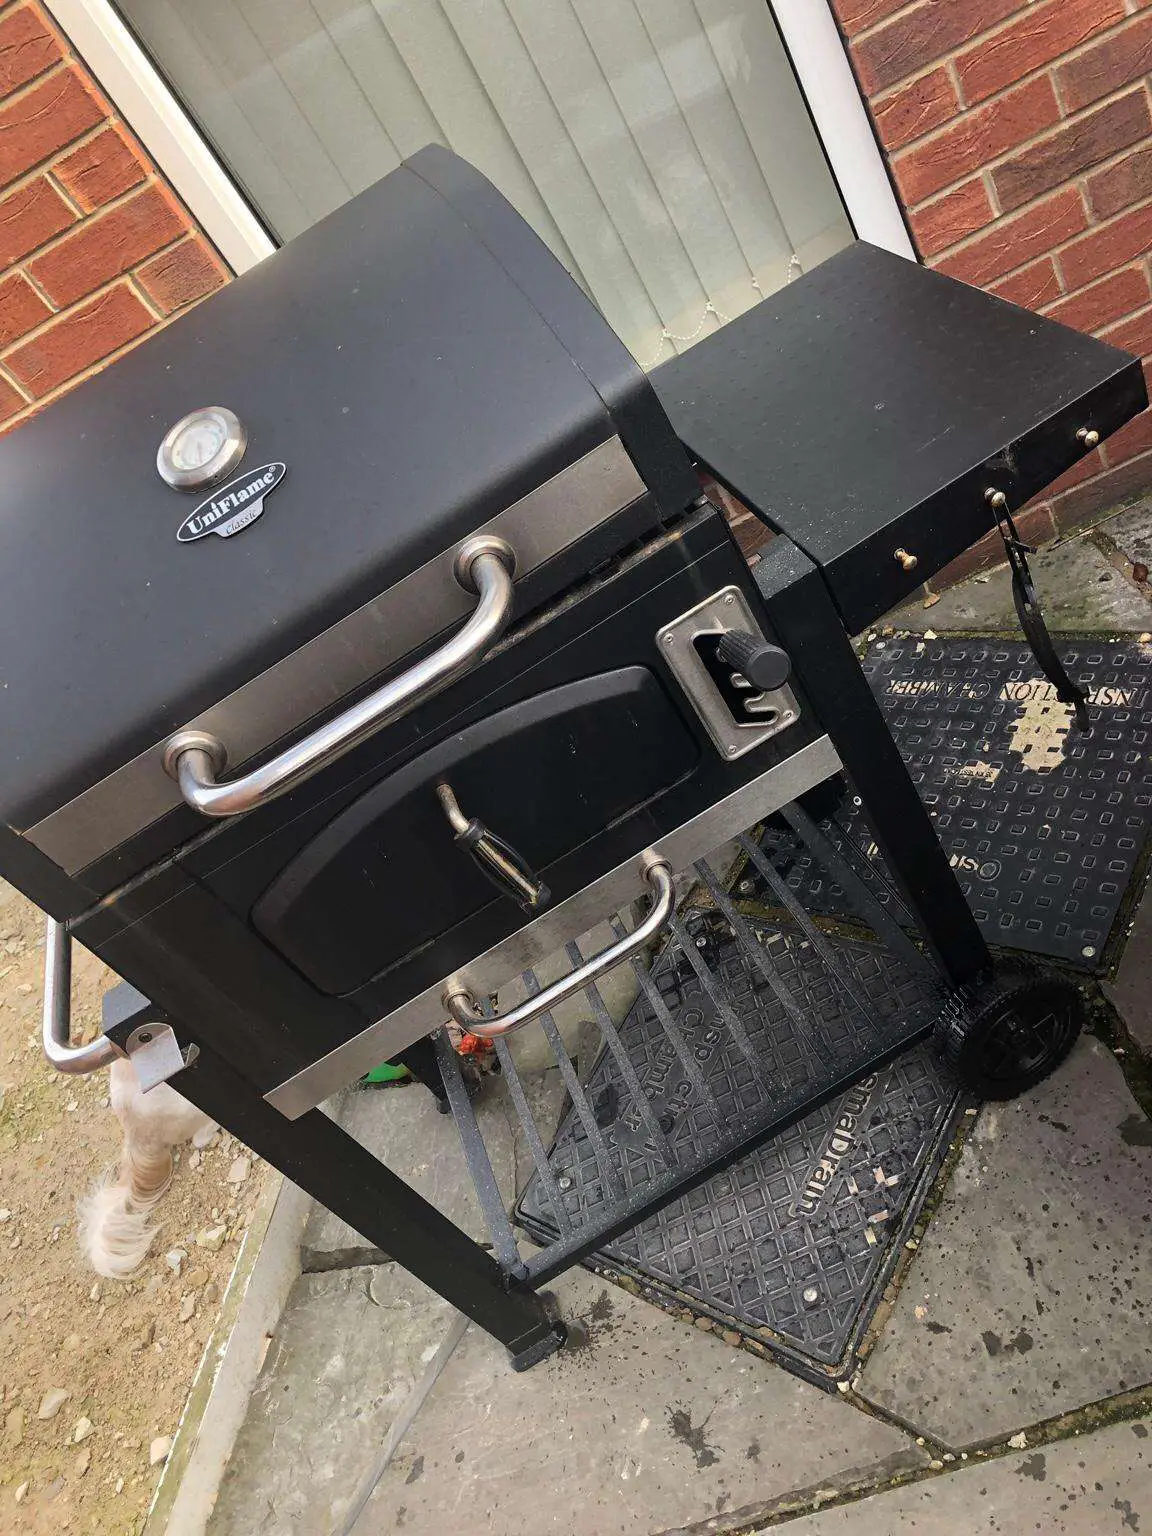 BBQ uniflame classic American grill in Doncaster for Â£50.00 for sale ...